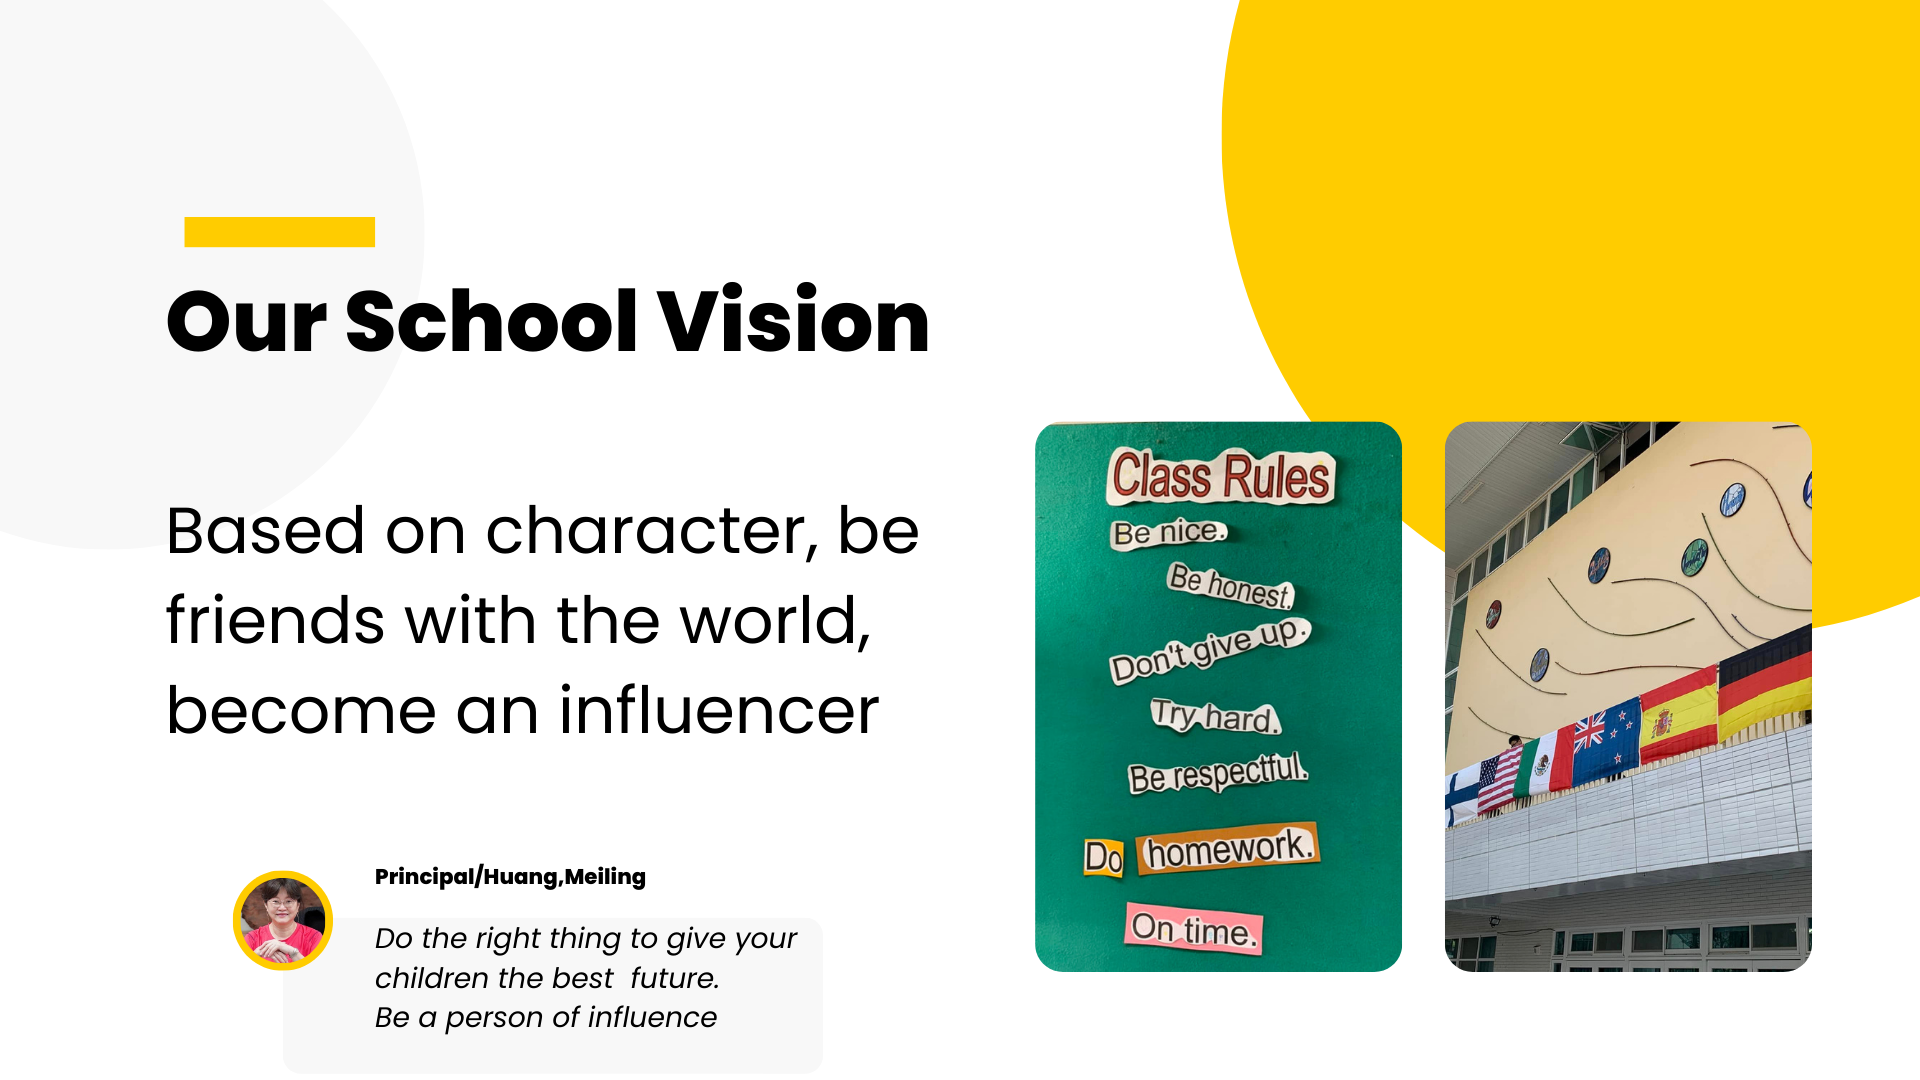 Our School Vision